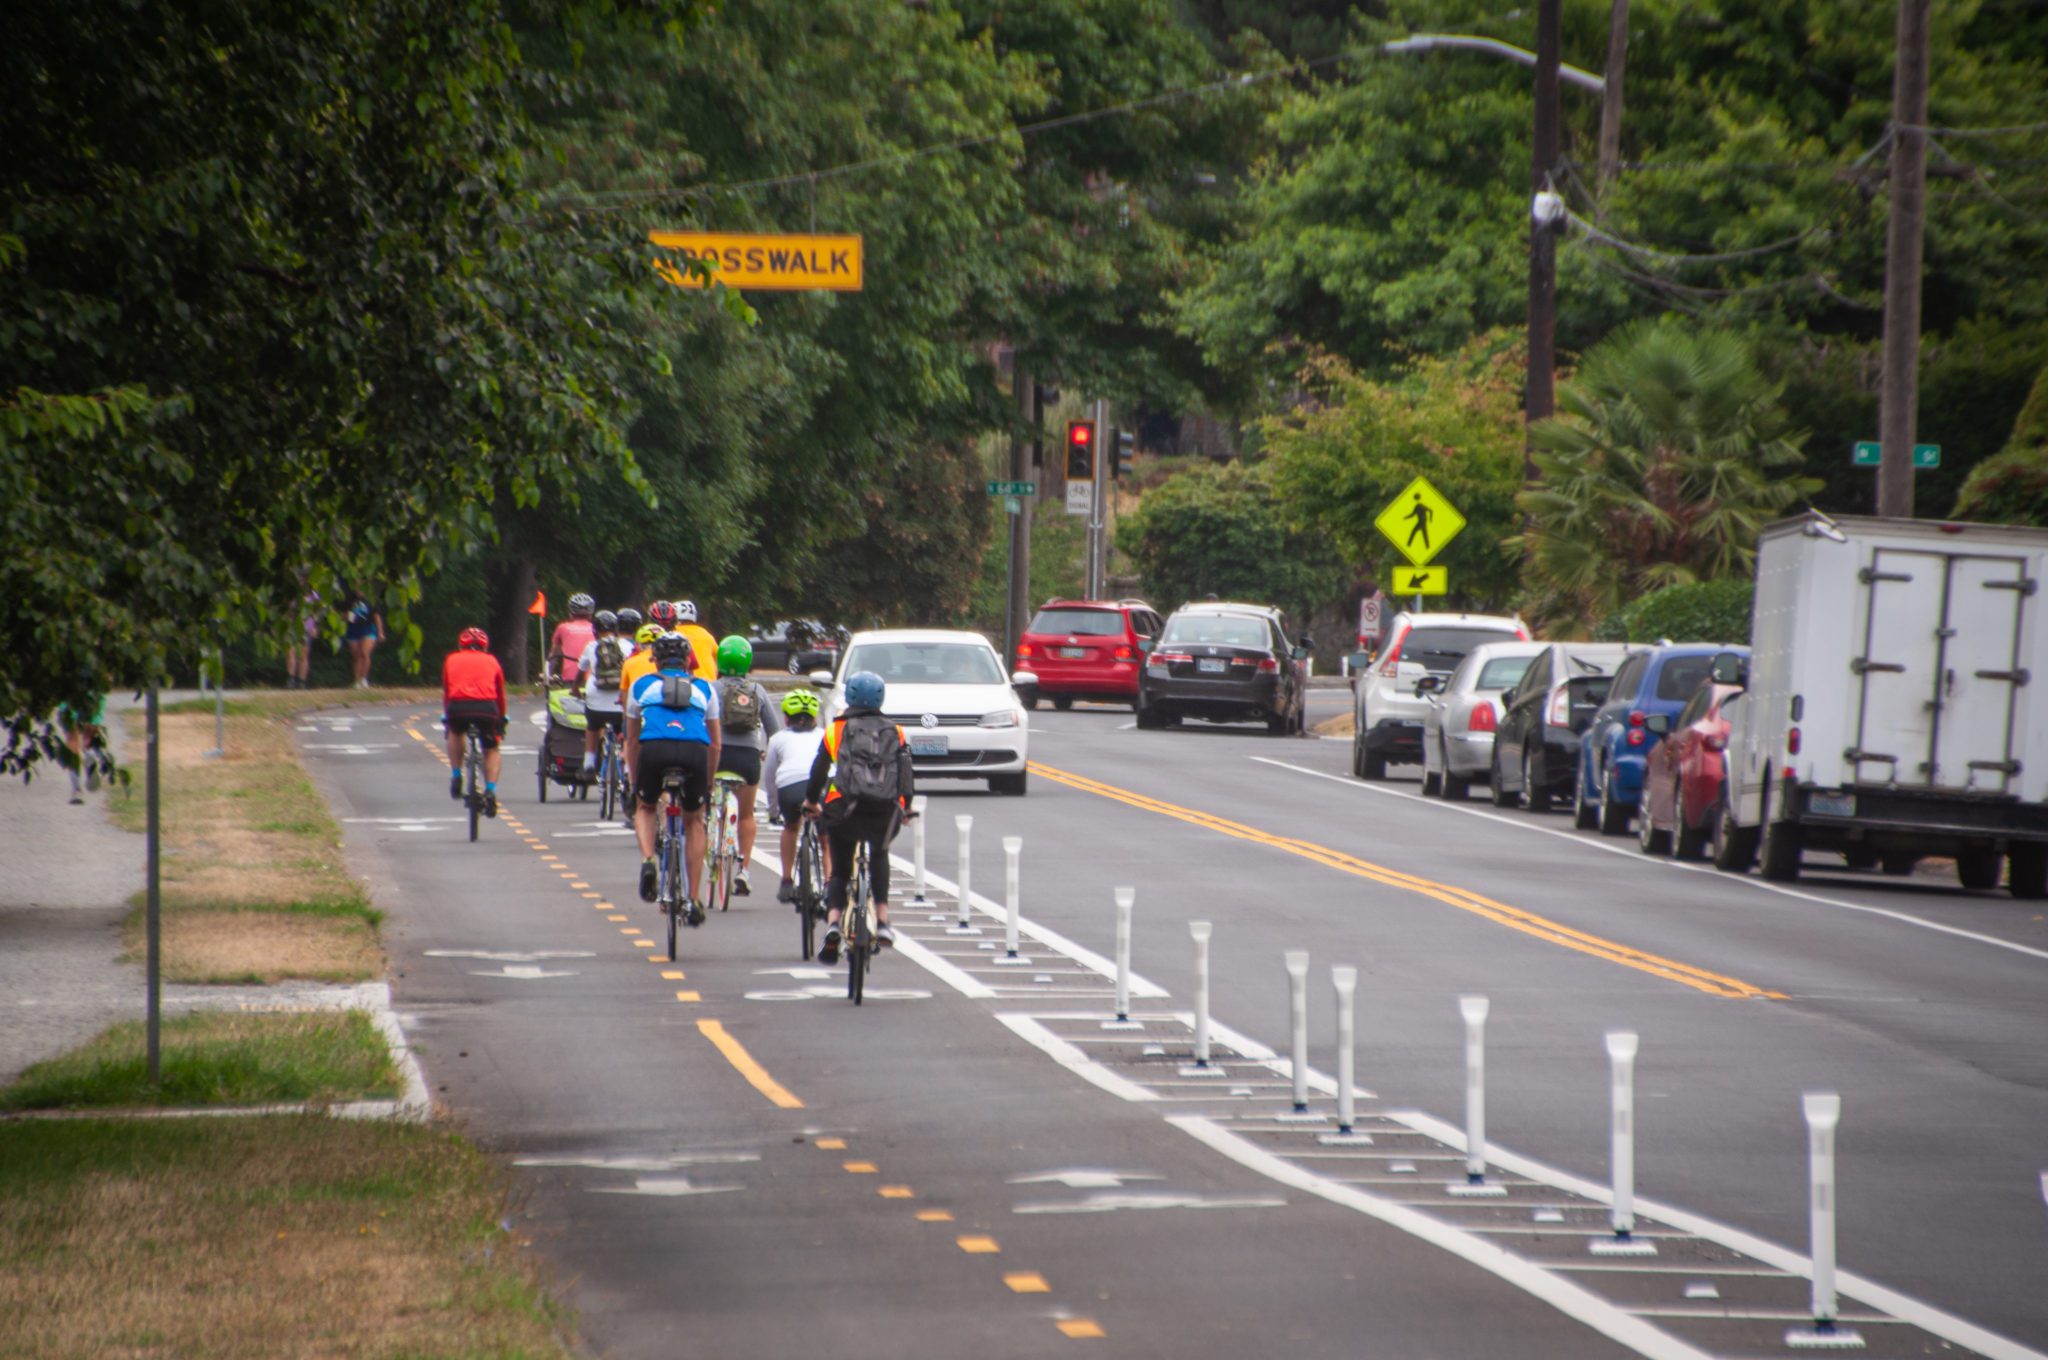 People bike in the new protected bike lanes on streets around Green Lake, which were completed in summer 2021.